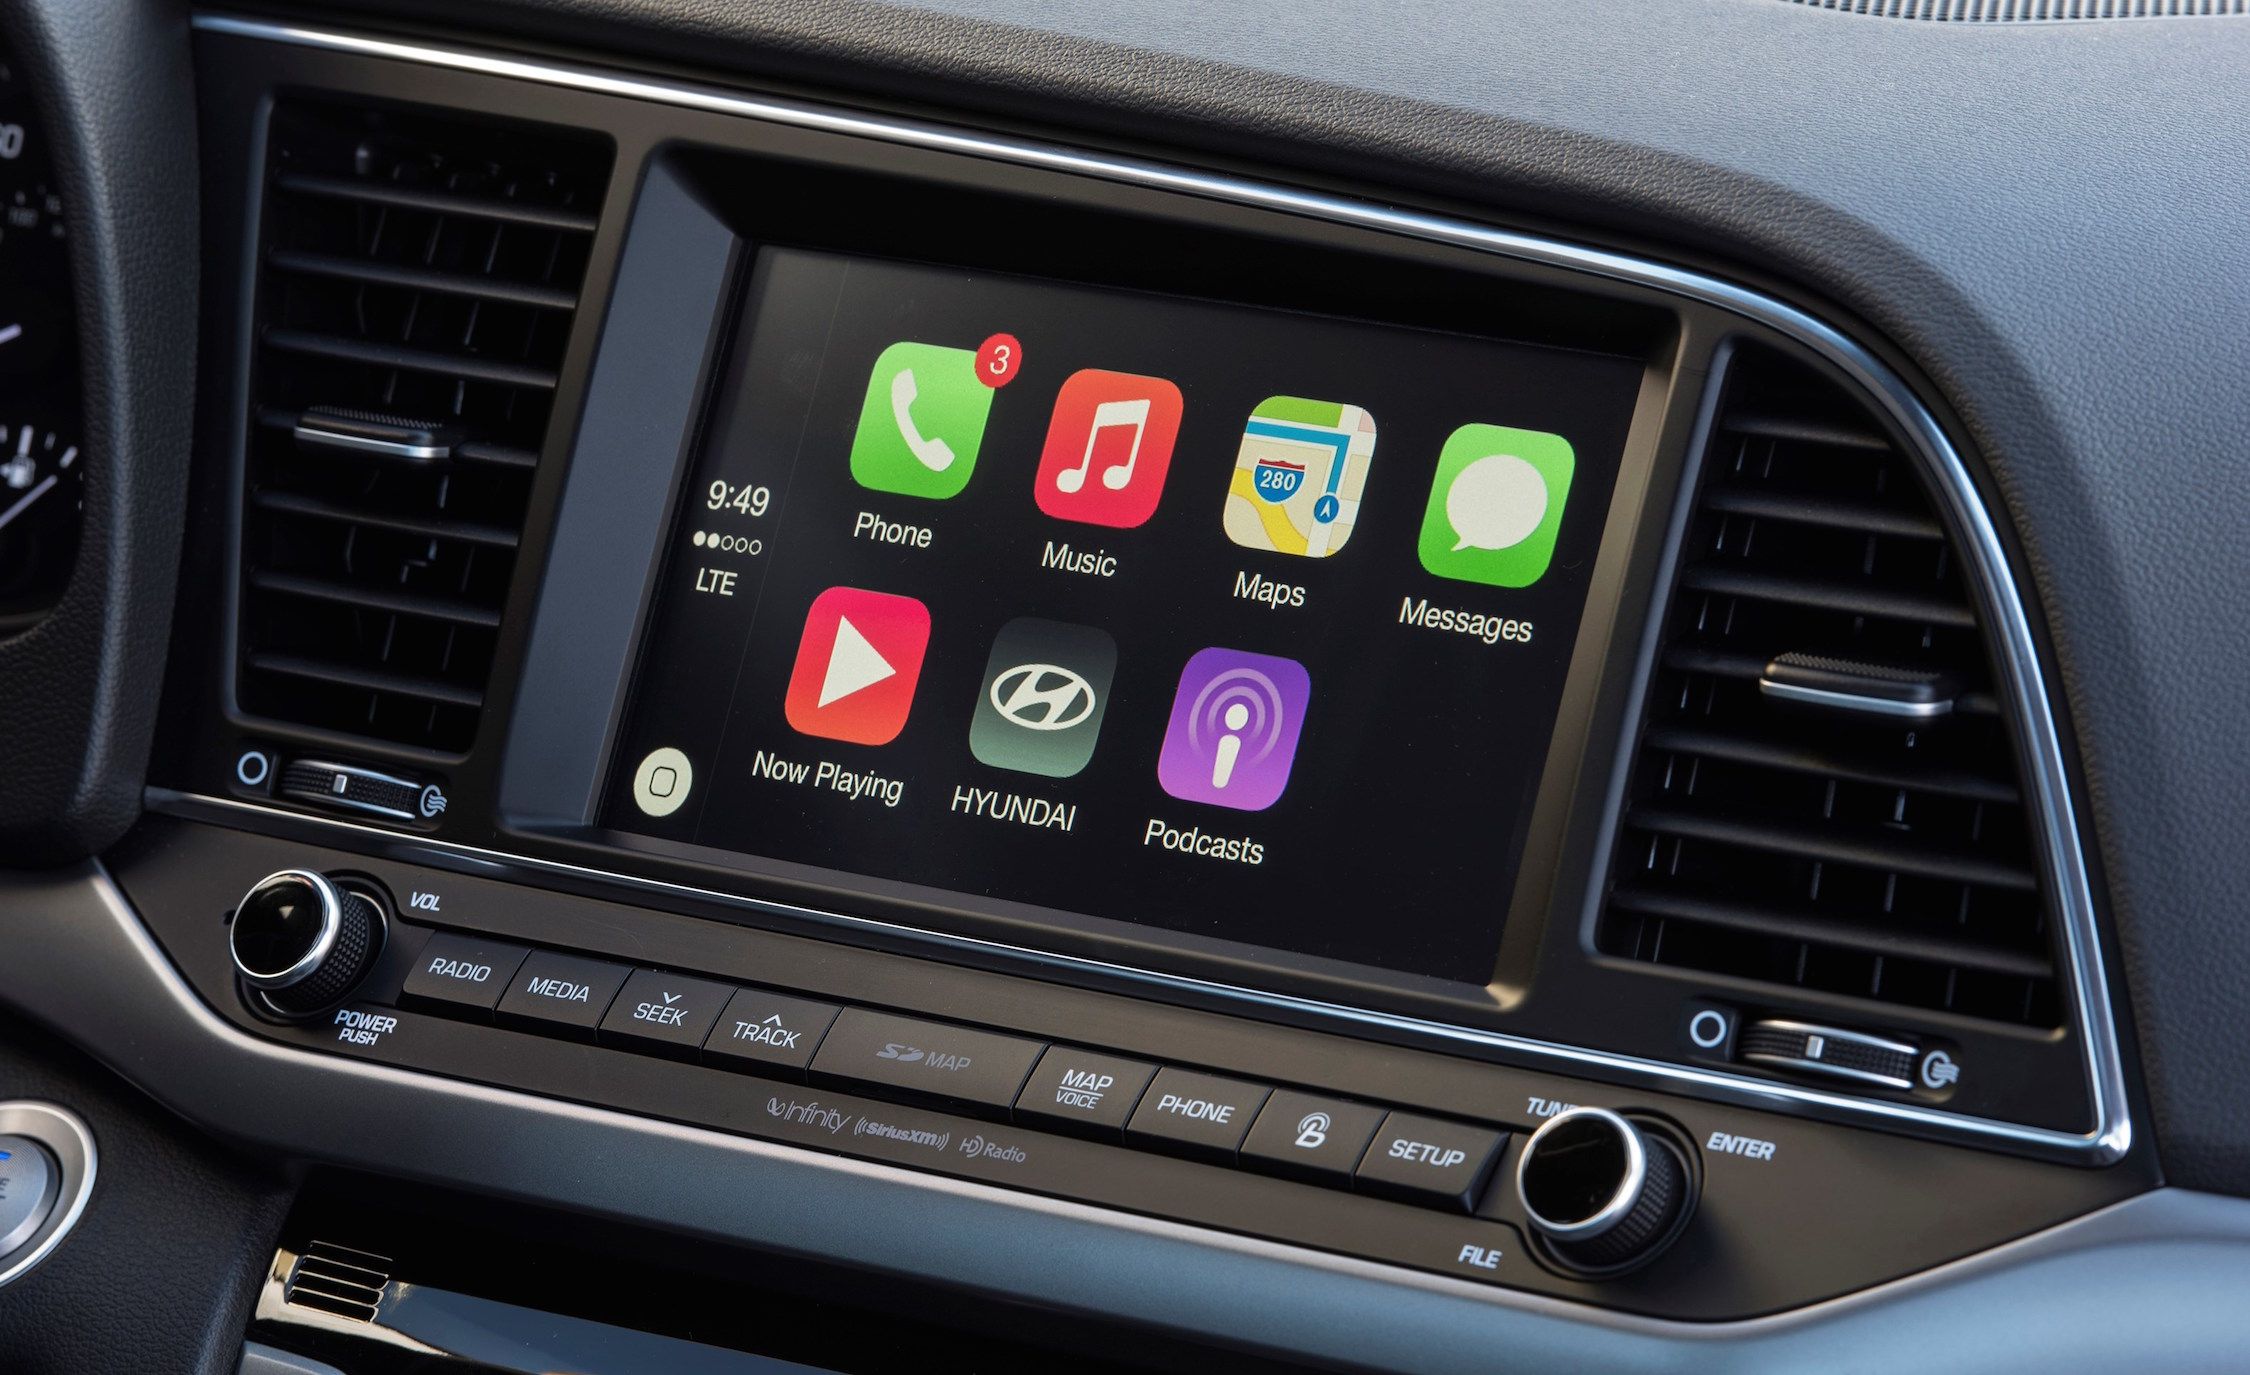 Automotive Infotainment Market 2022-27: Size, Share, Trends, Growth And Analysis